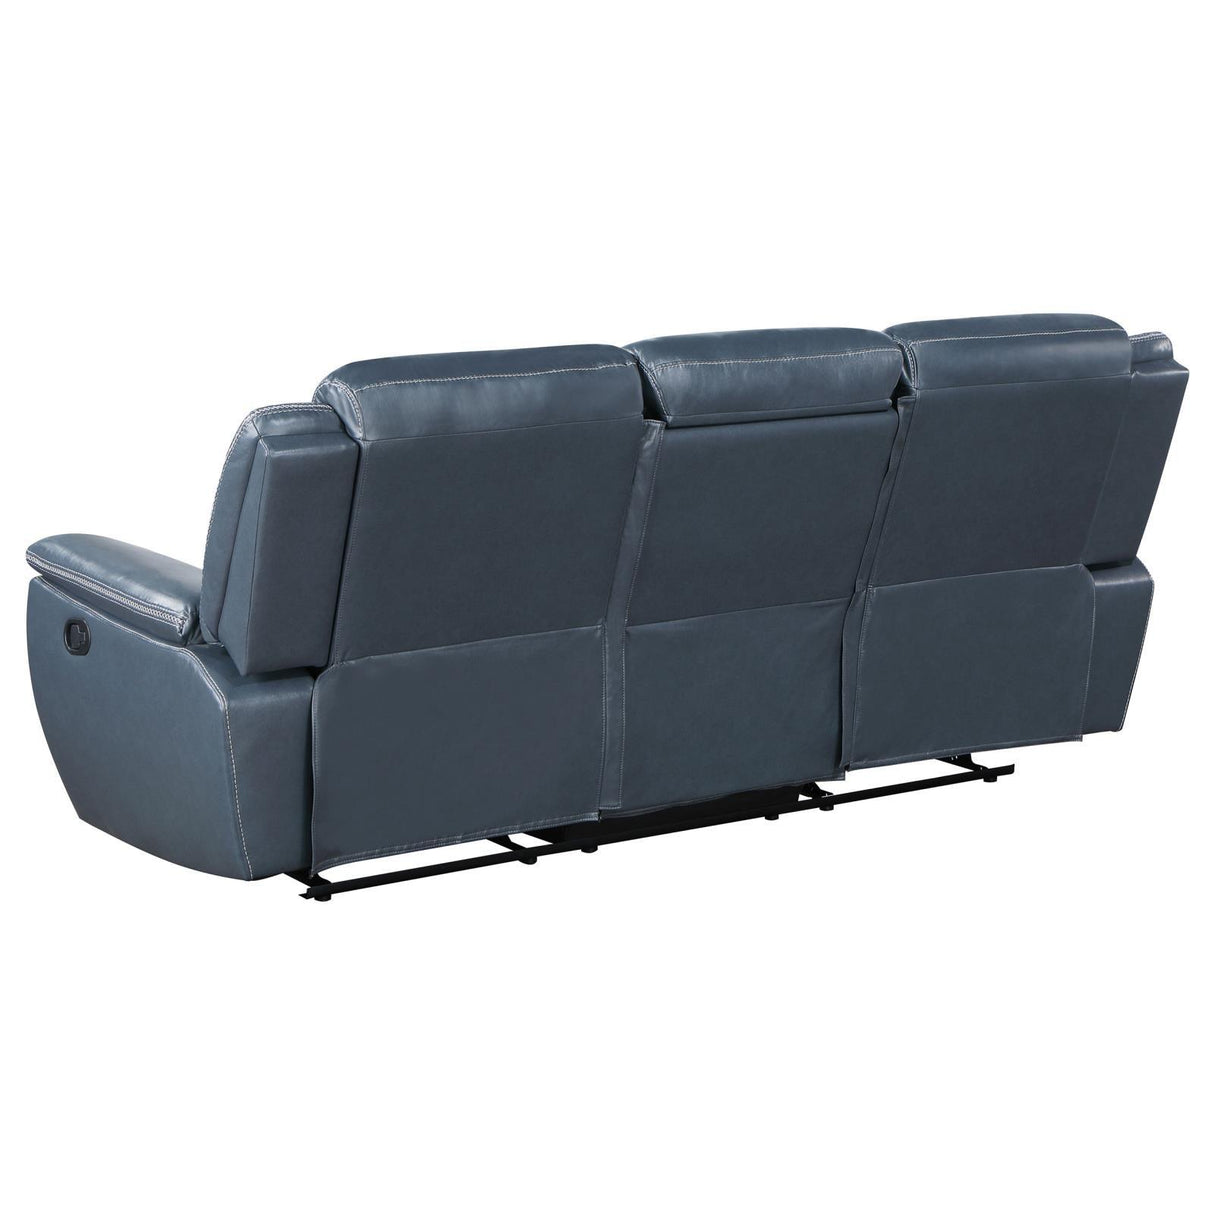 Sloane Upholstered Motion Reclining Sofa With Drop Down Table Blue 610271 - Ella Furniture